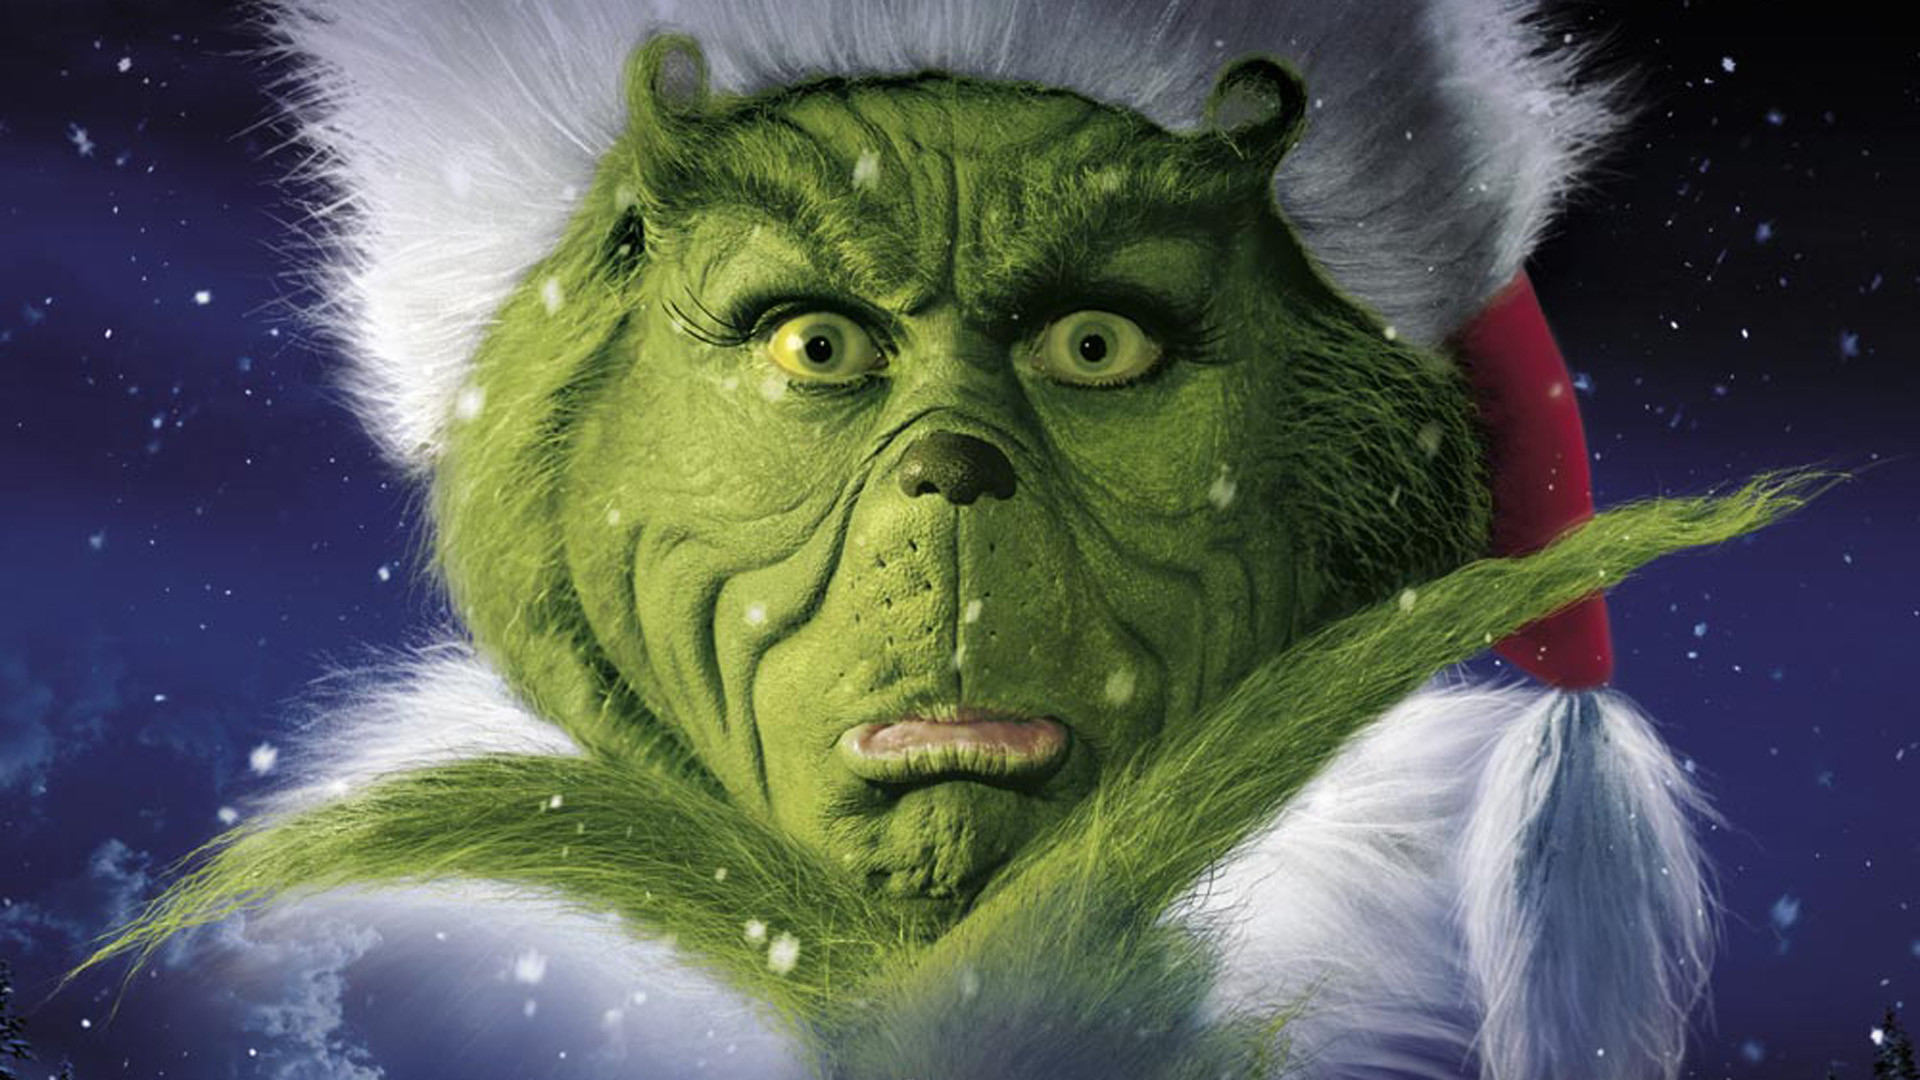 grinch-christmas-wallpaper-stole-title-images-clubs-image-photos